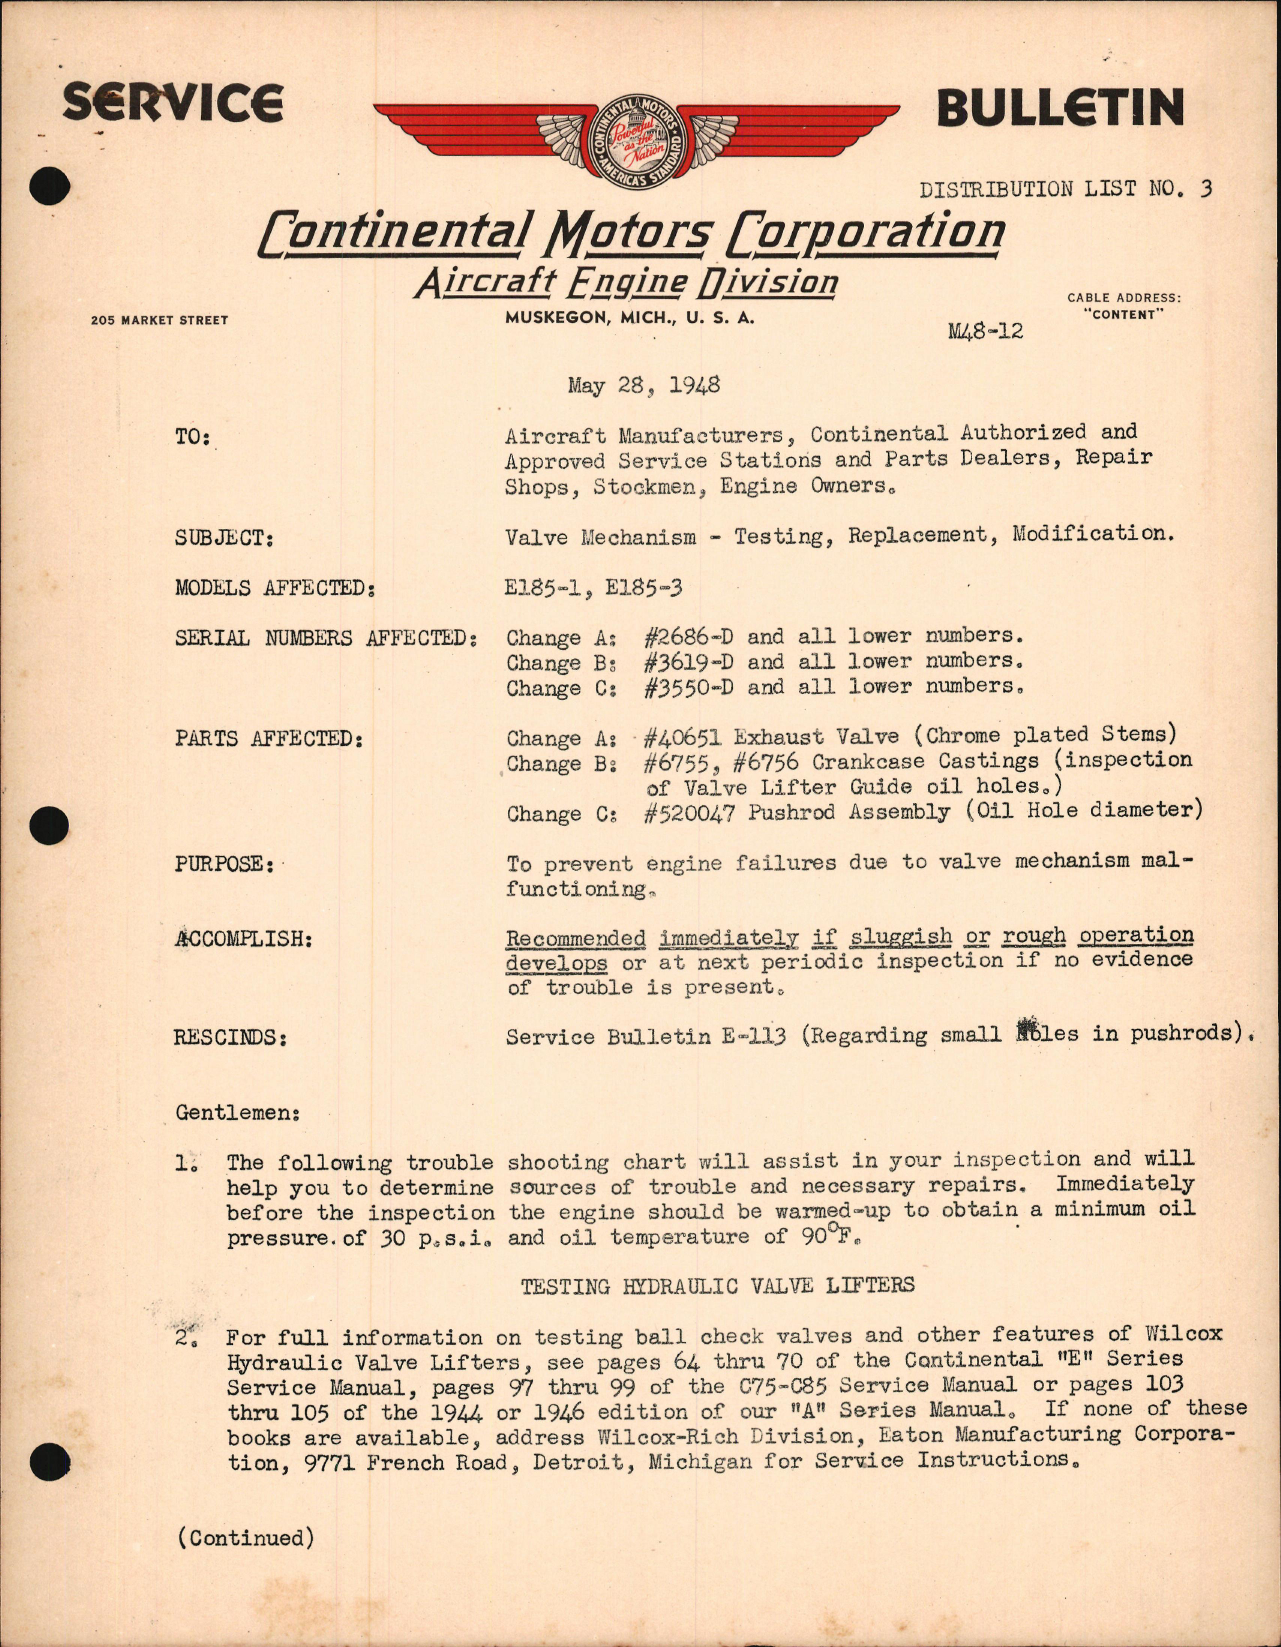 Sample page 1 from AirCorps Library document: Valve Mechanism - Testing, Replacement & Modification